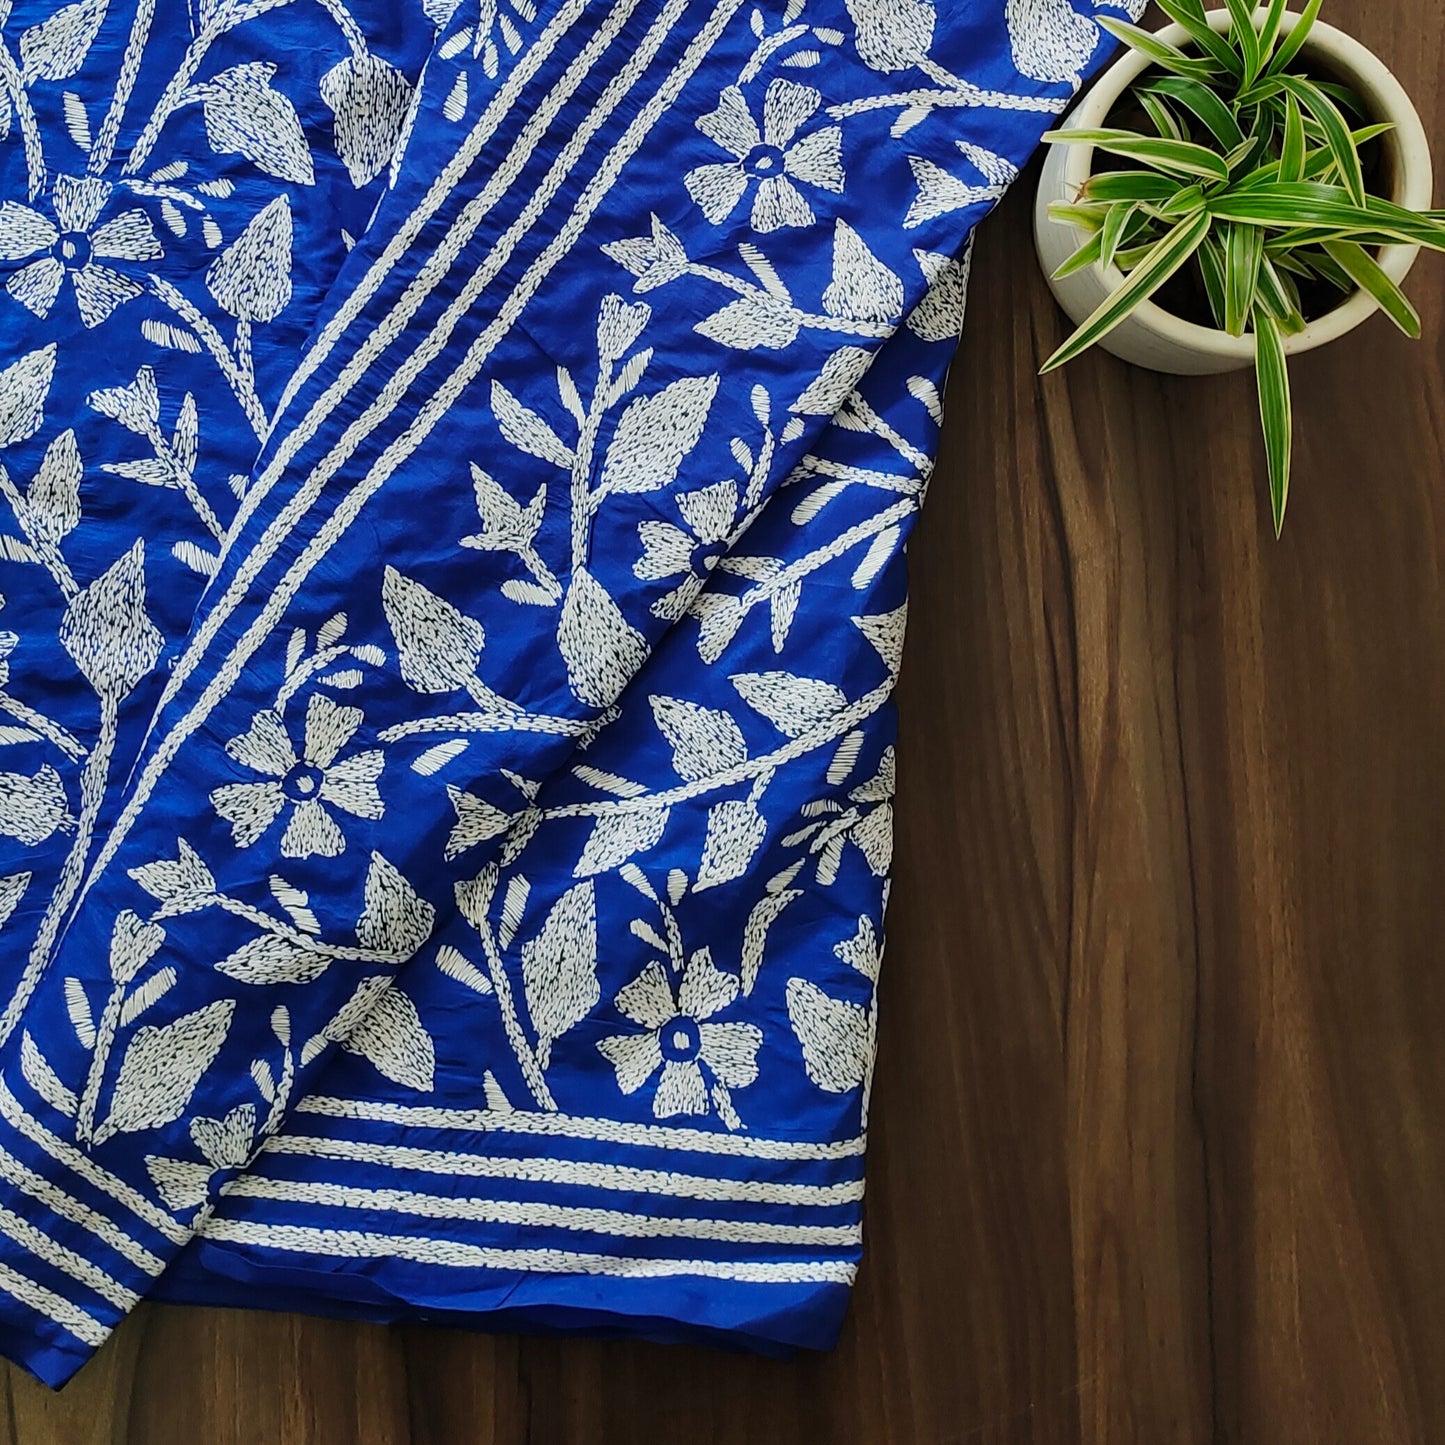 Regal Blooms: Royal Blue Kantha Saree with White Floral Embroidery